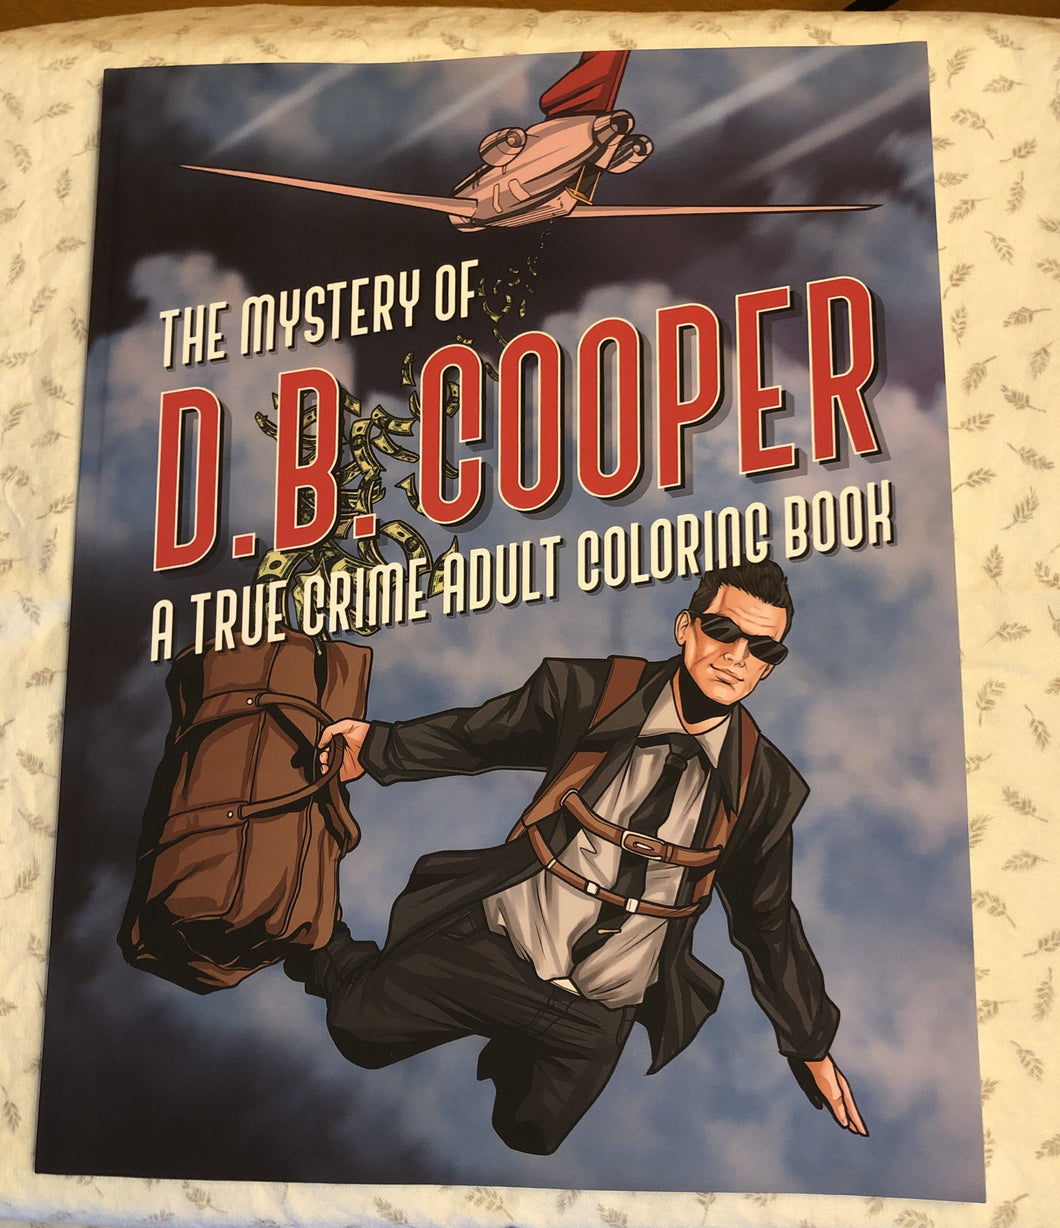 The Mystery Of D.B. Cooper: A True Crime Adult Coloring Book